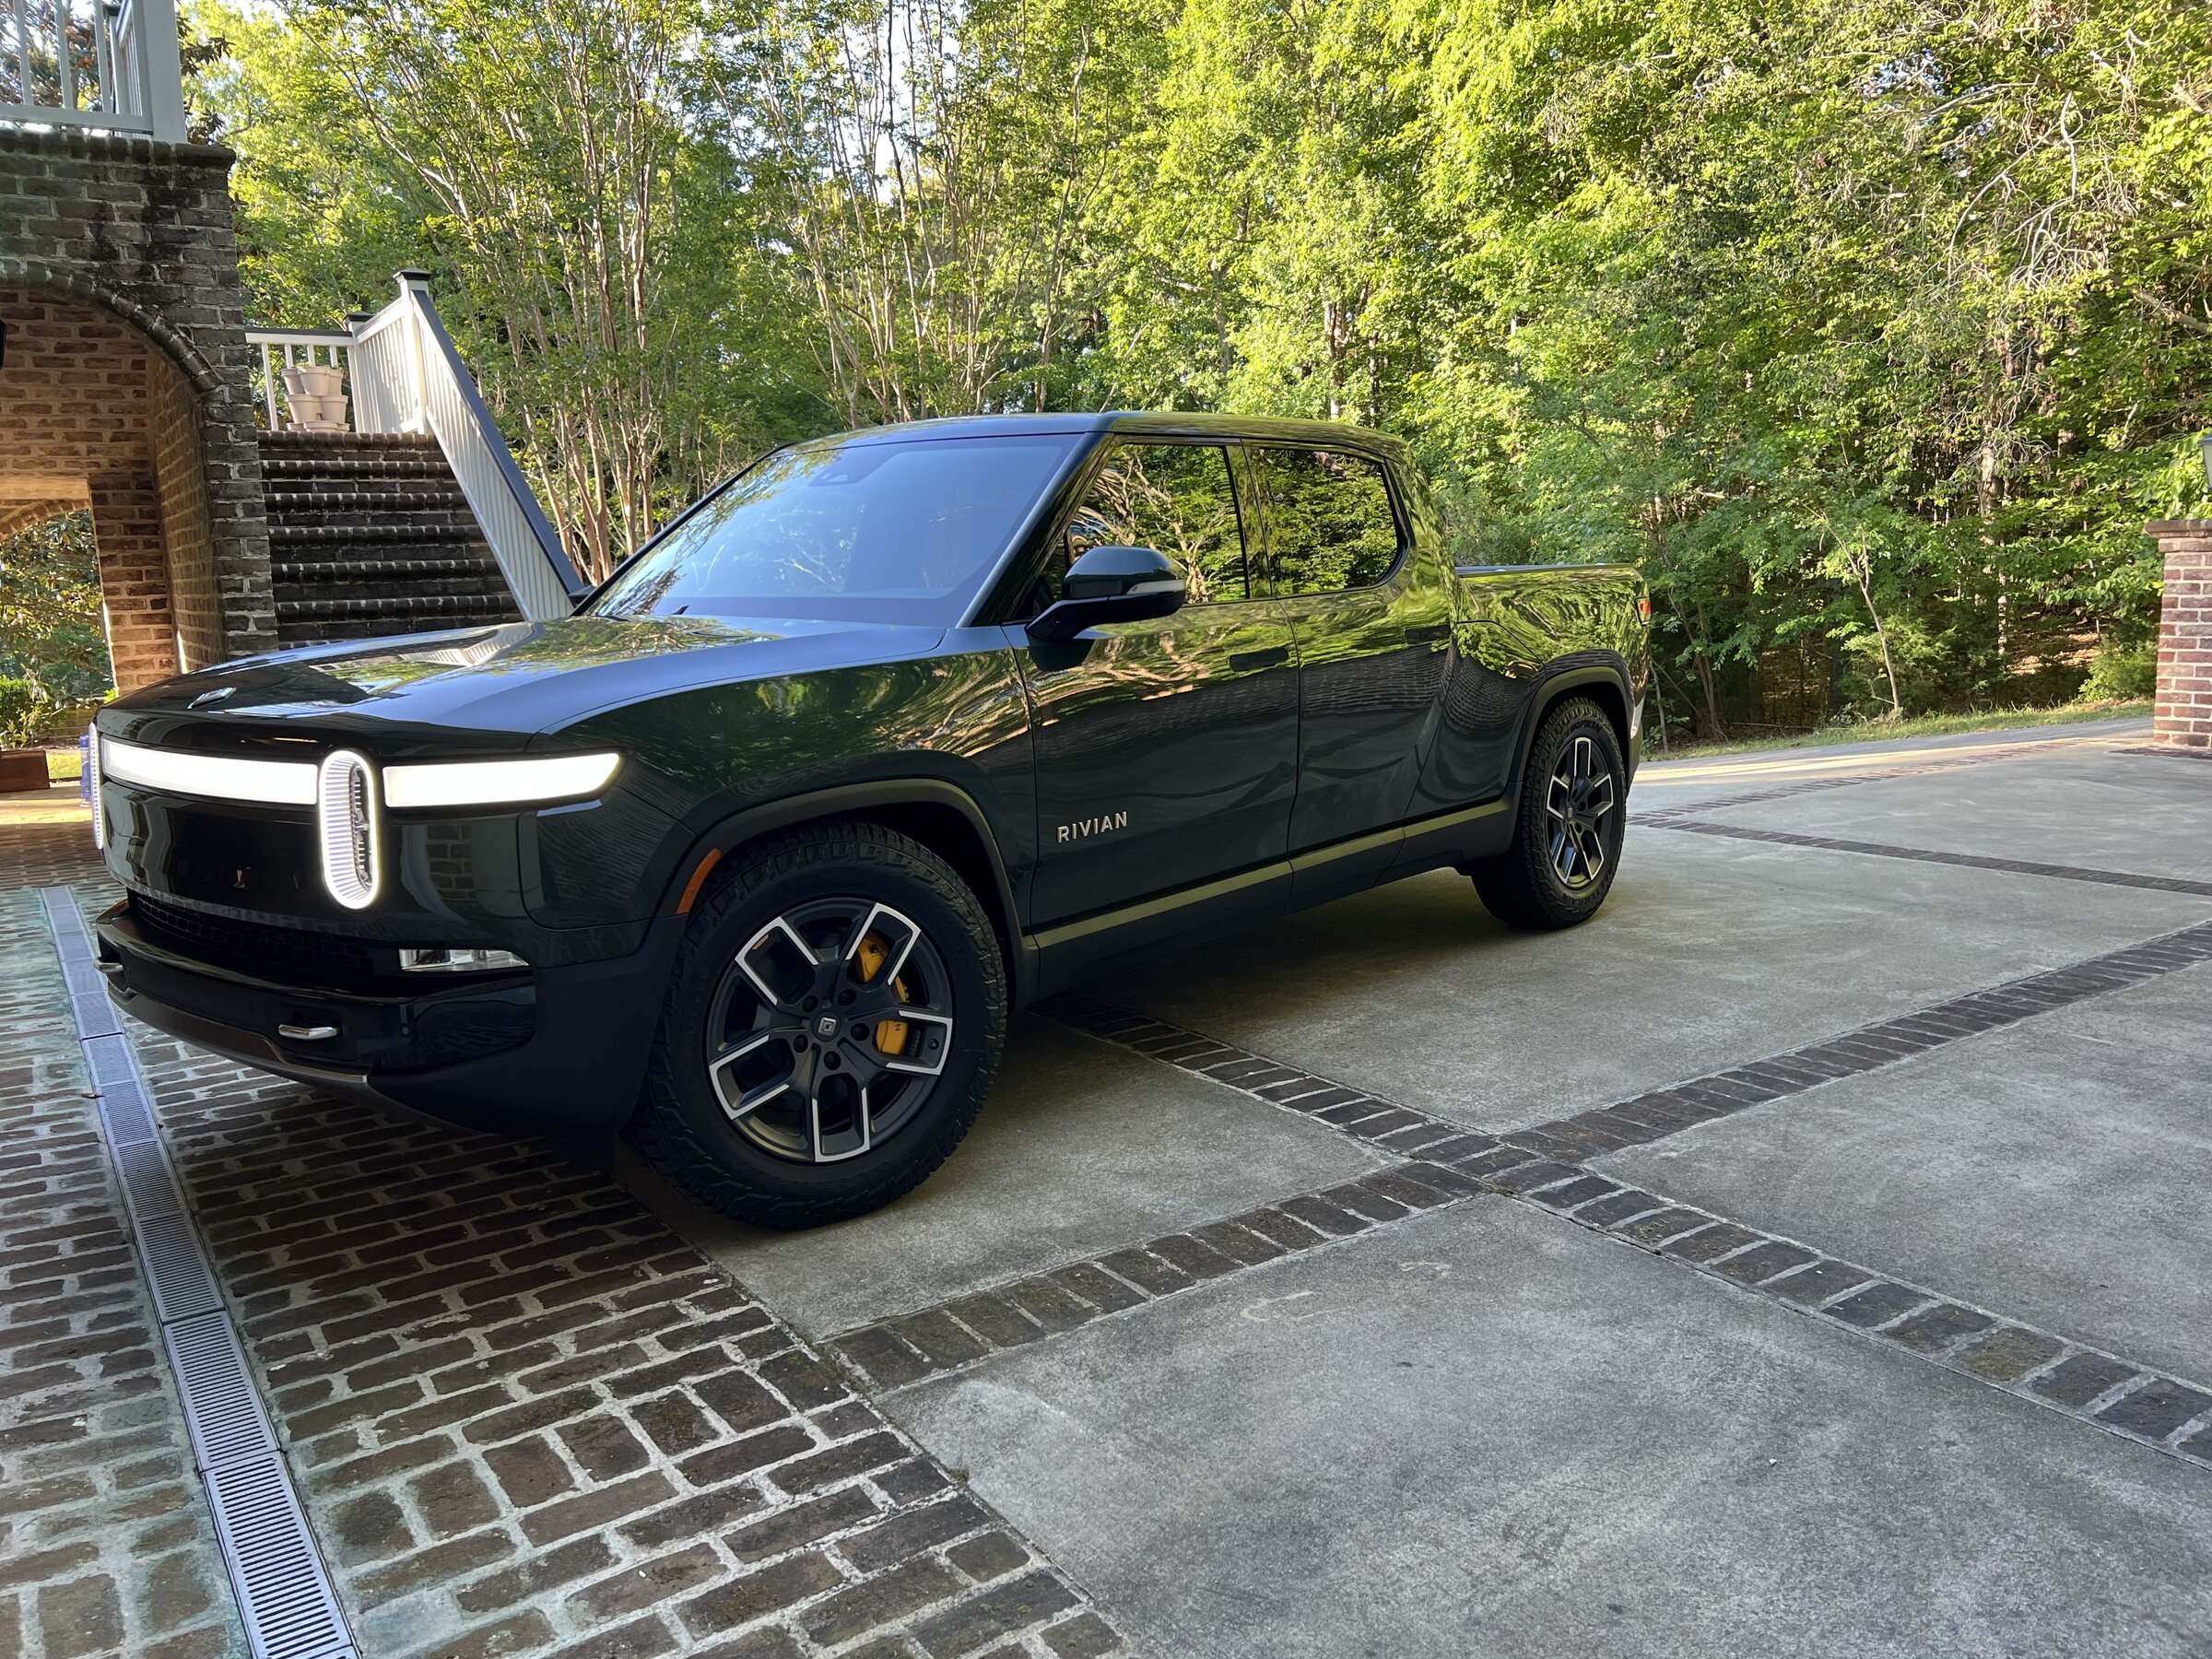 Rivian R1T R1S It's finally here. First impressions IMG_2528.JPG